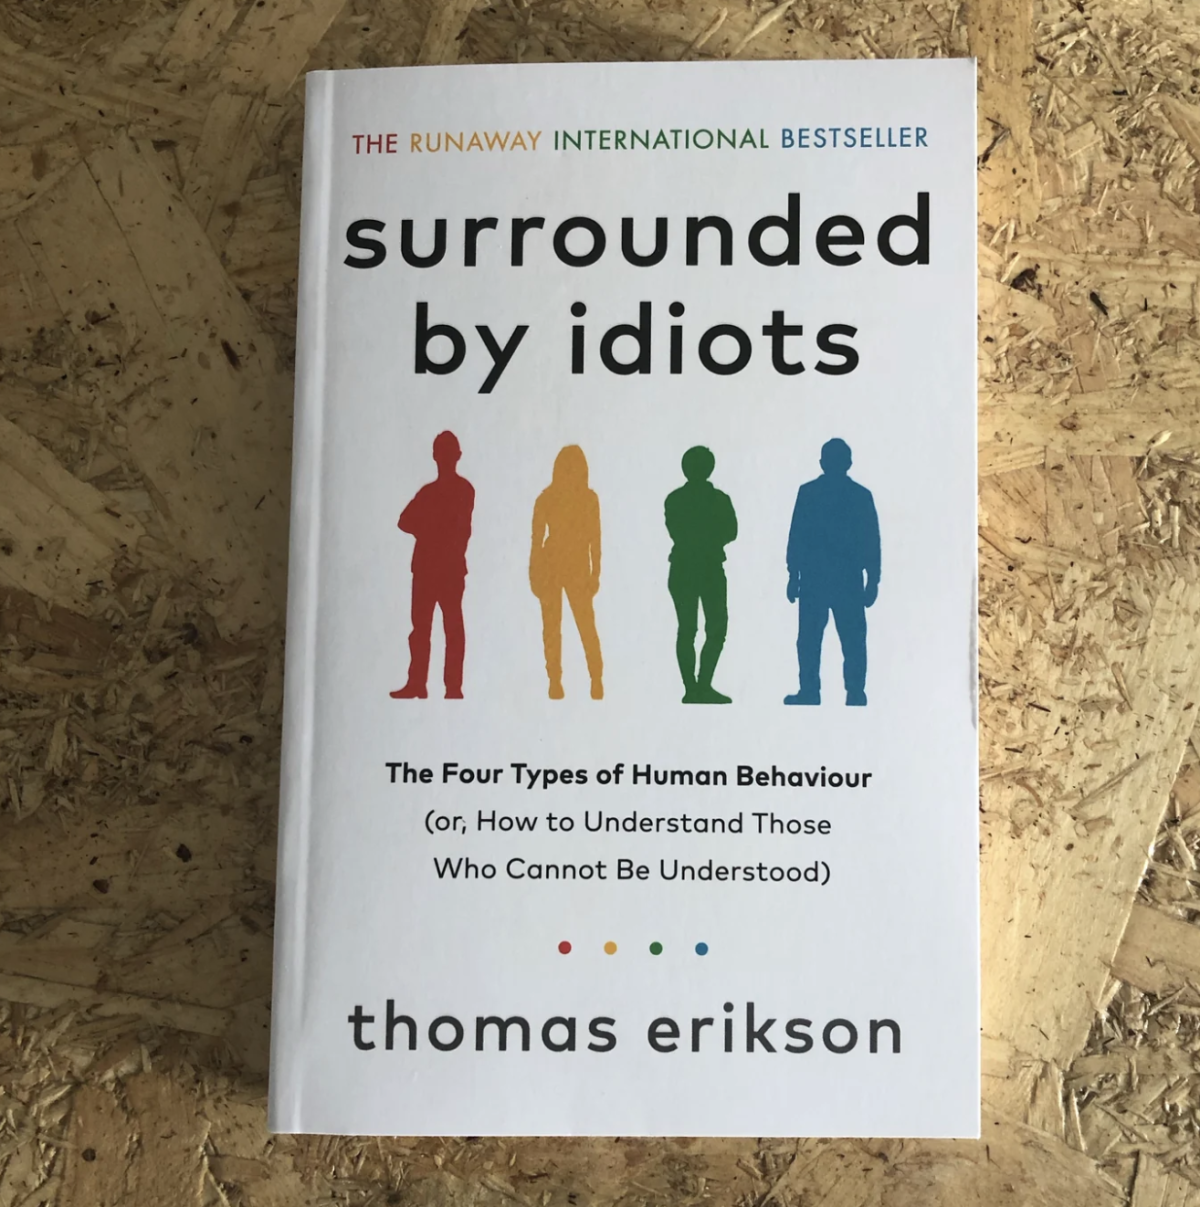 CEO Blog: Surrounded by idiots